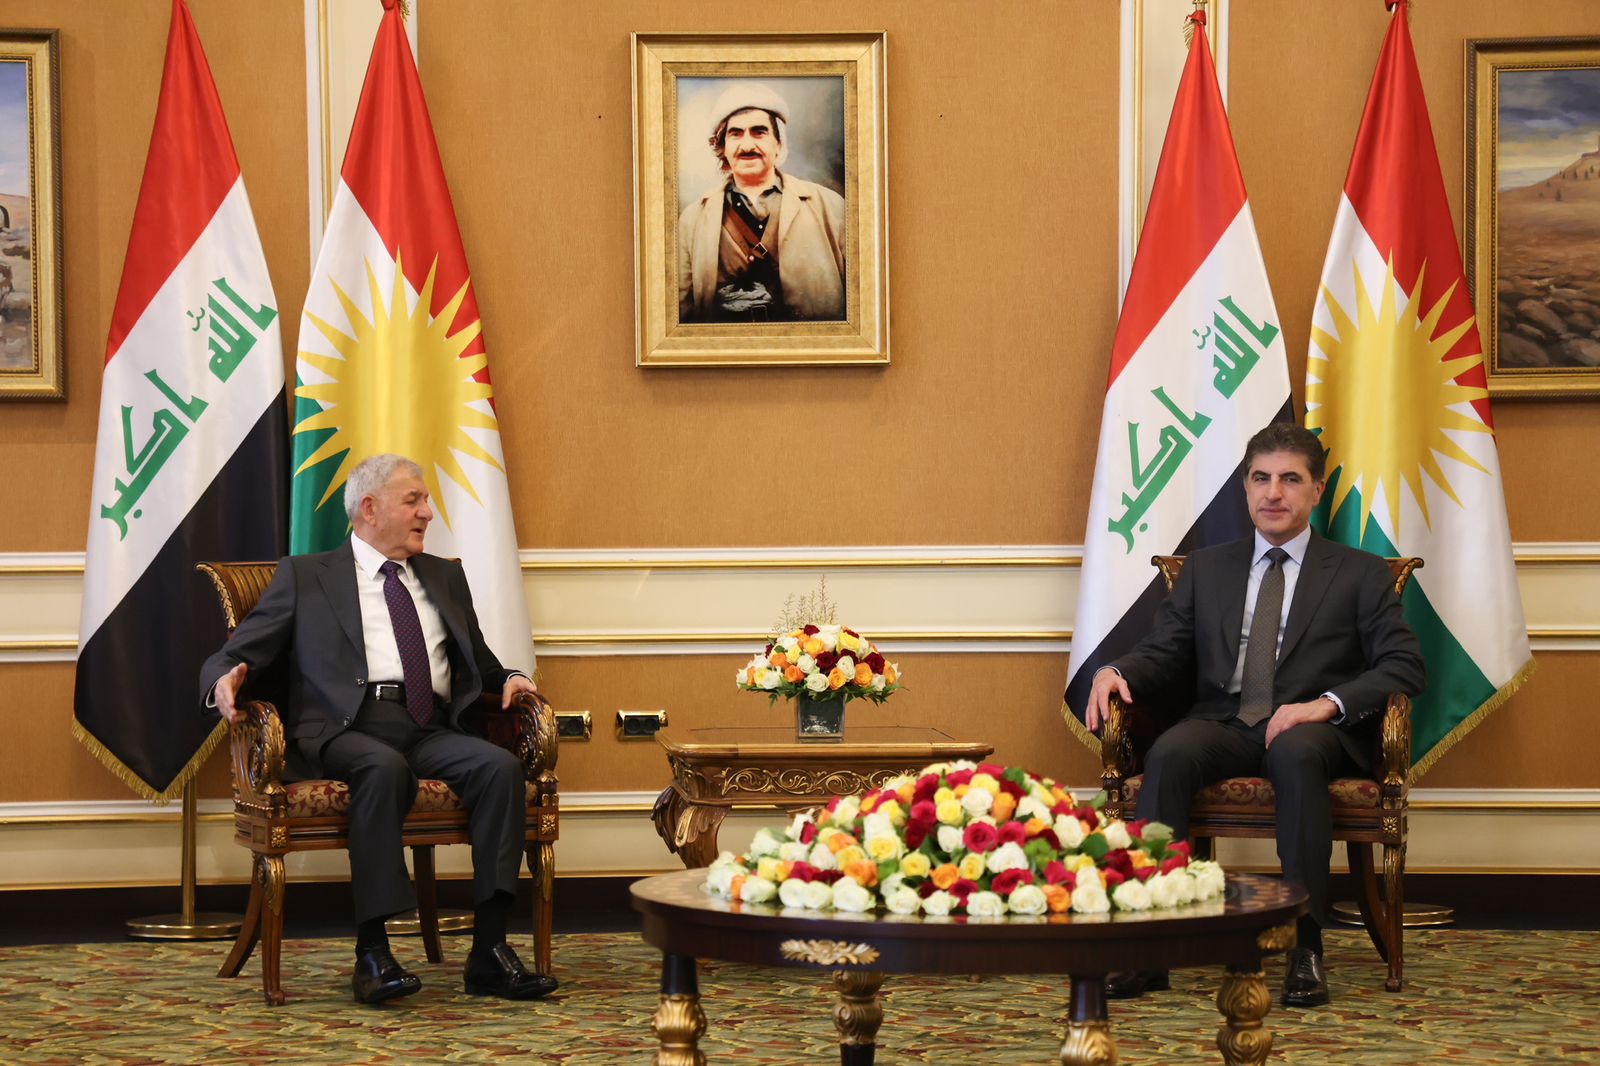 Kurdistans president premier extend Ramadan greetings as KRG announces Monday the beginning of the fasting month